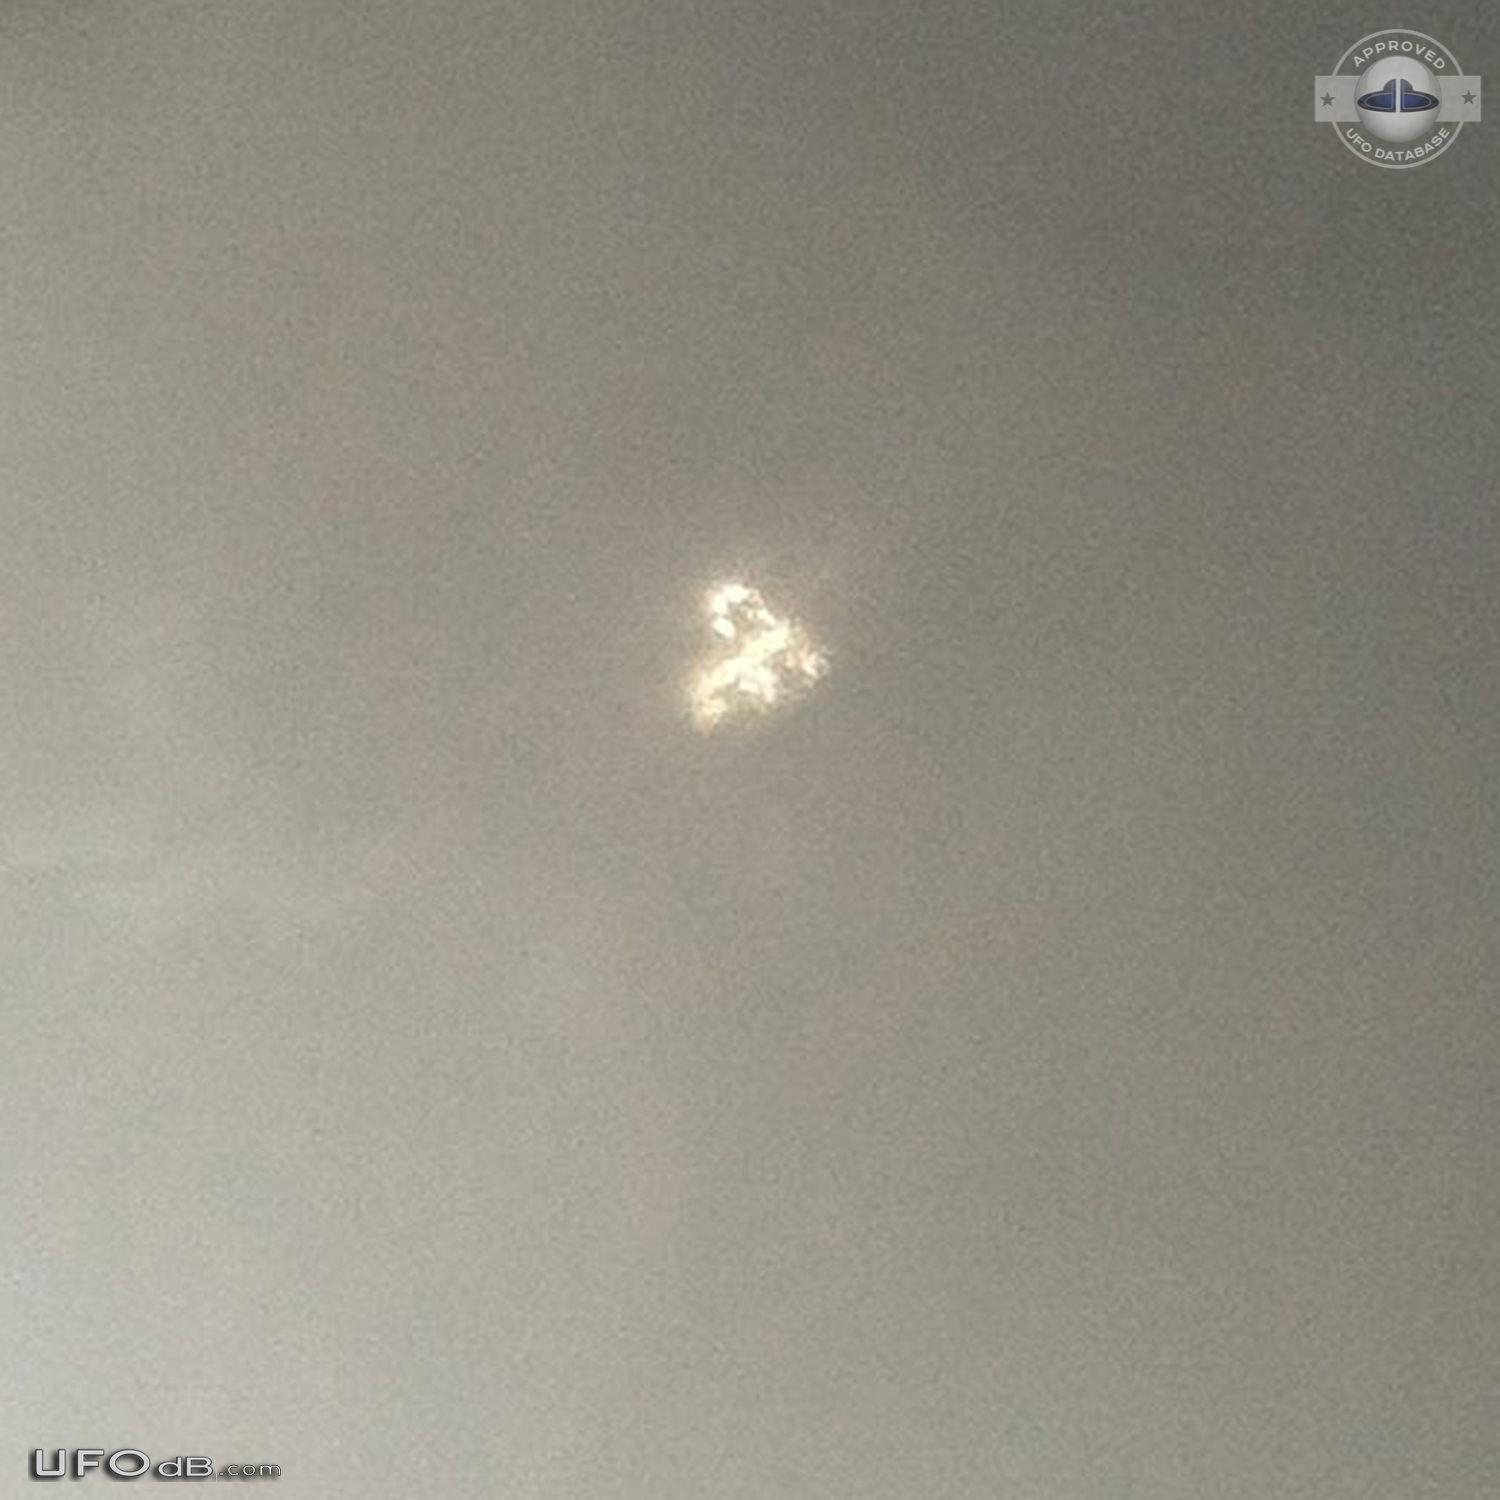 UFO appeared, disappeared and appeared again in Los Angeles CA 2015 UFO Picture #651-3